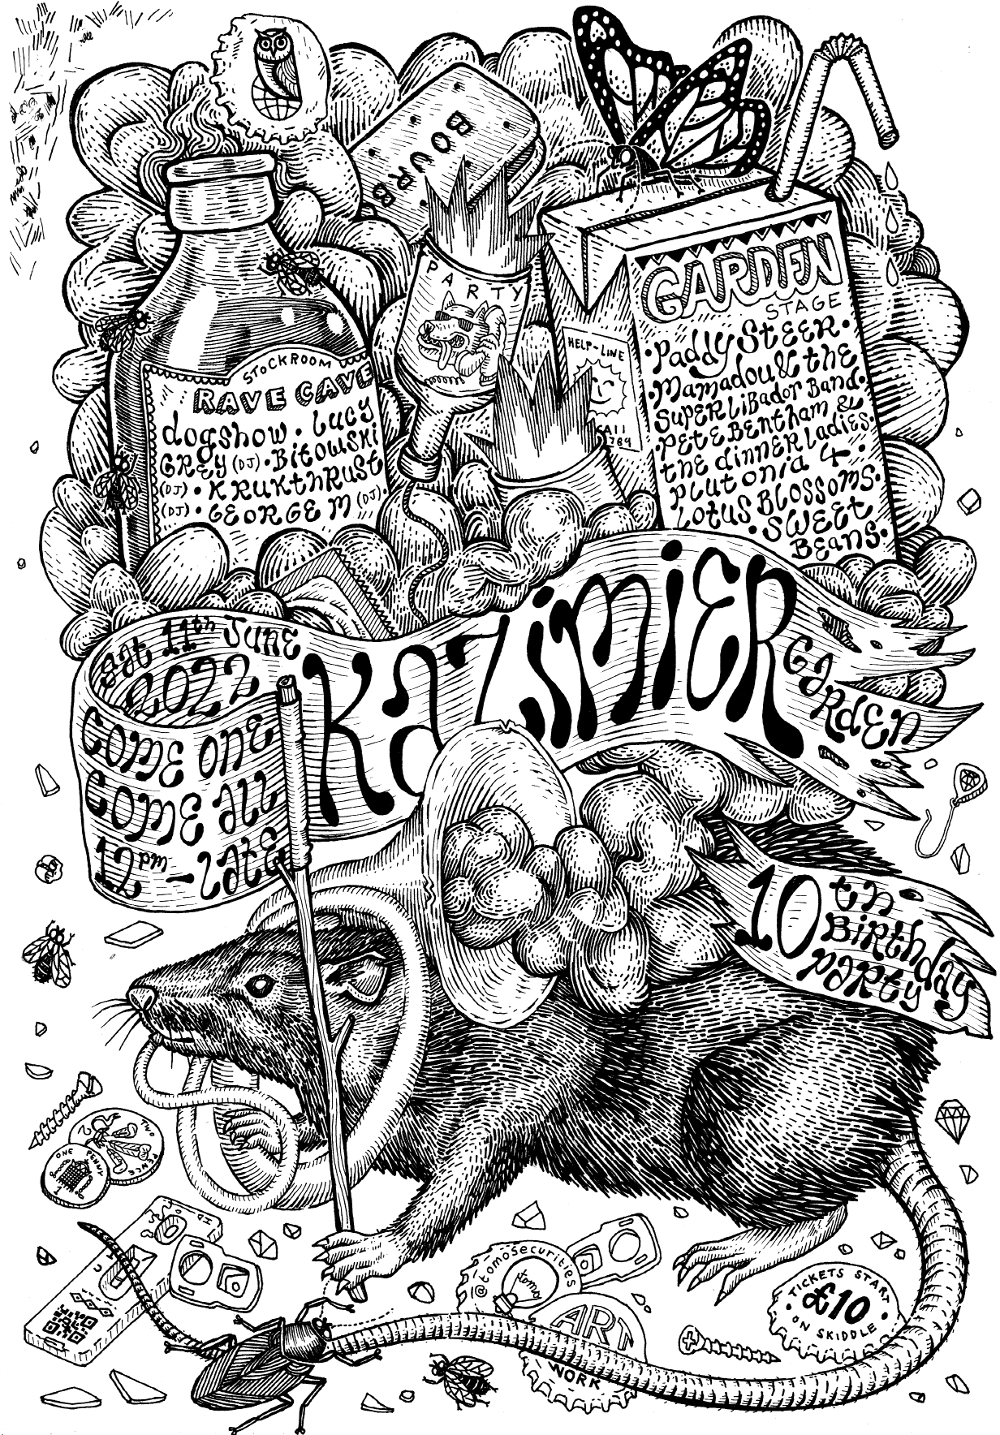 Illustrated poster for Kazimier Gardens 10th Birthday Party by Tomo Securities